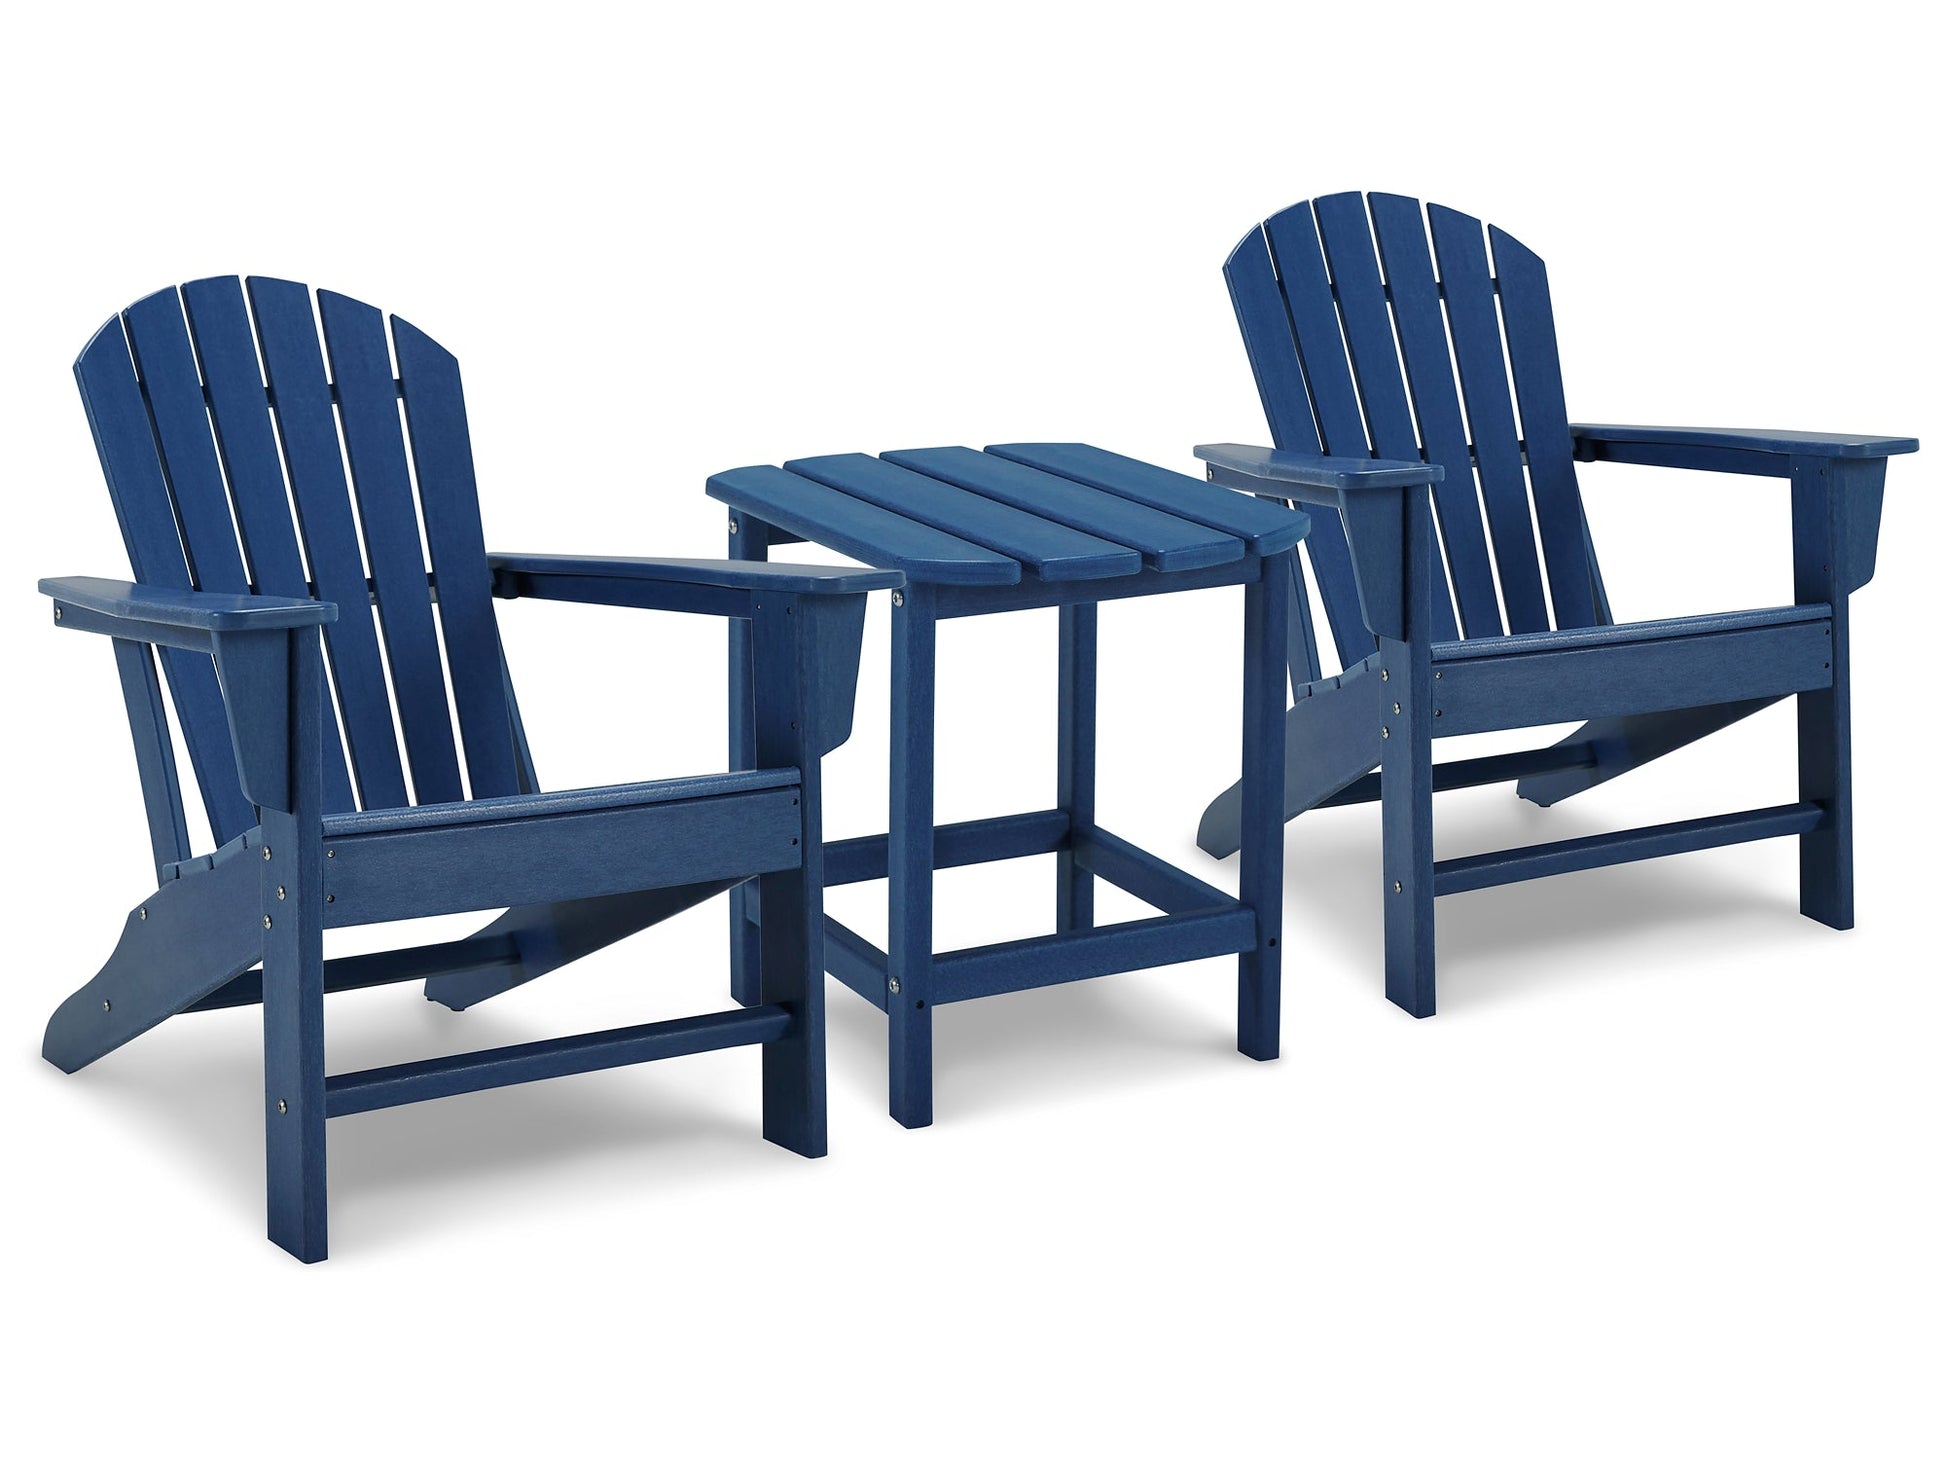 Sundown Treasure 2 Adirondack Chairs with End table at Walker Mattress and Furniture Locations in Cedar Park and Belton TX.